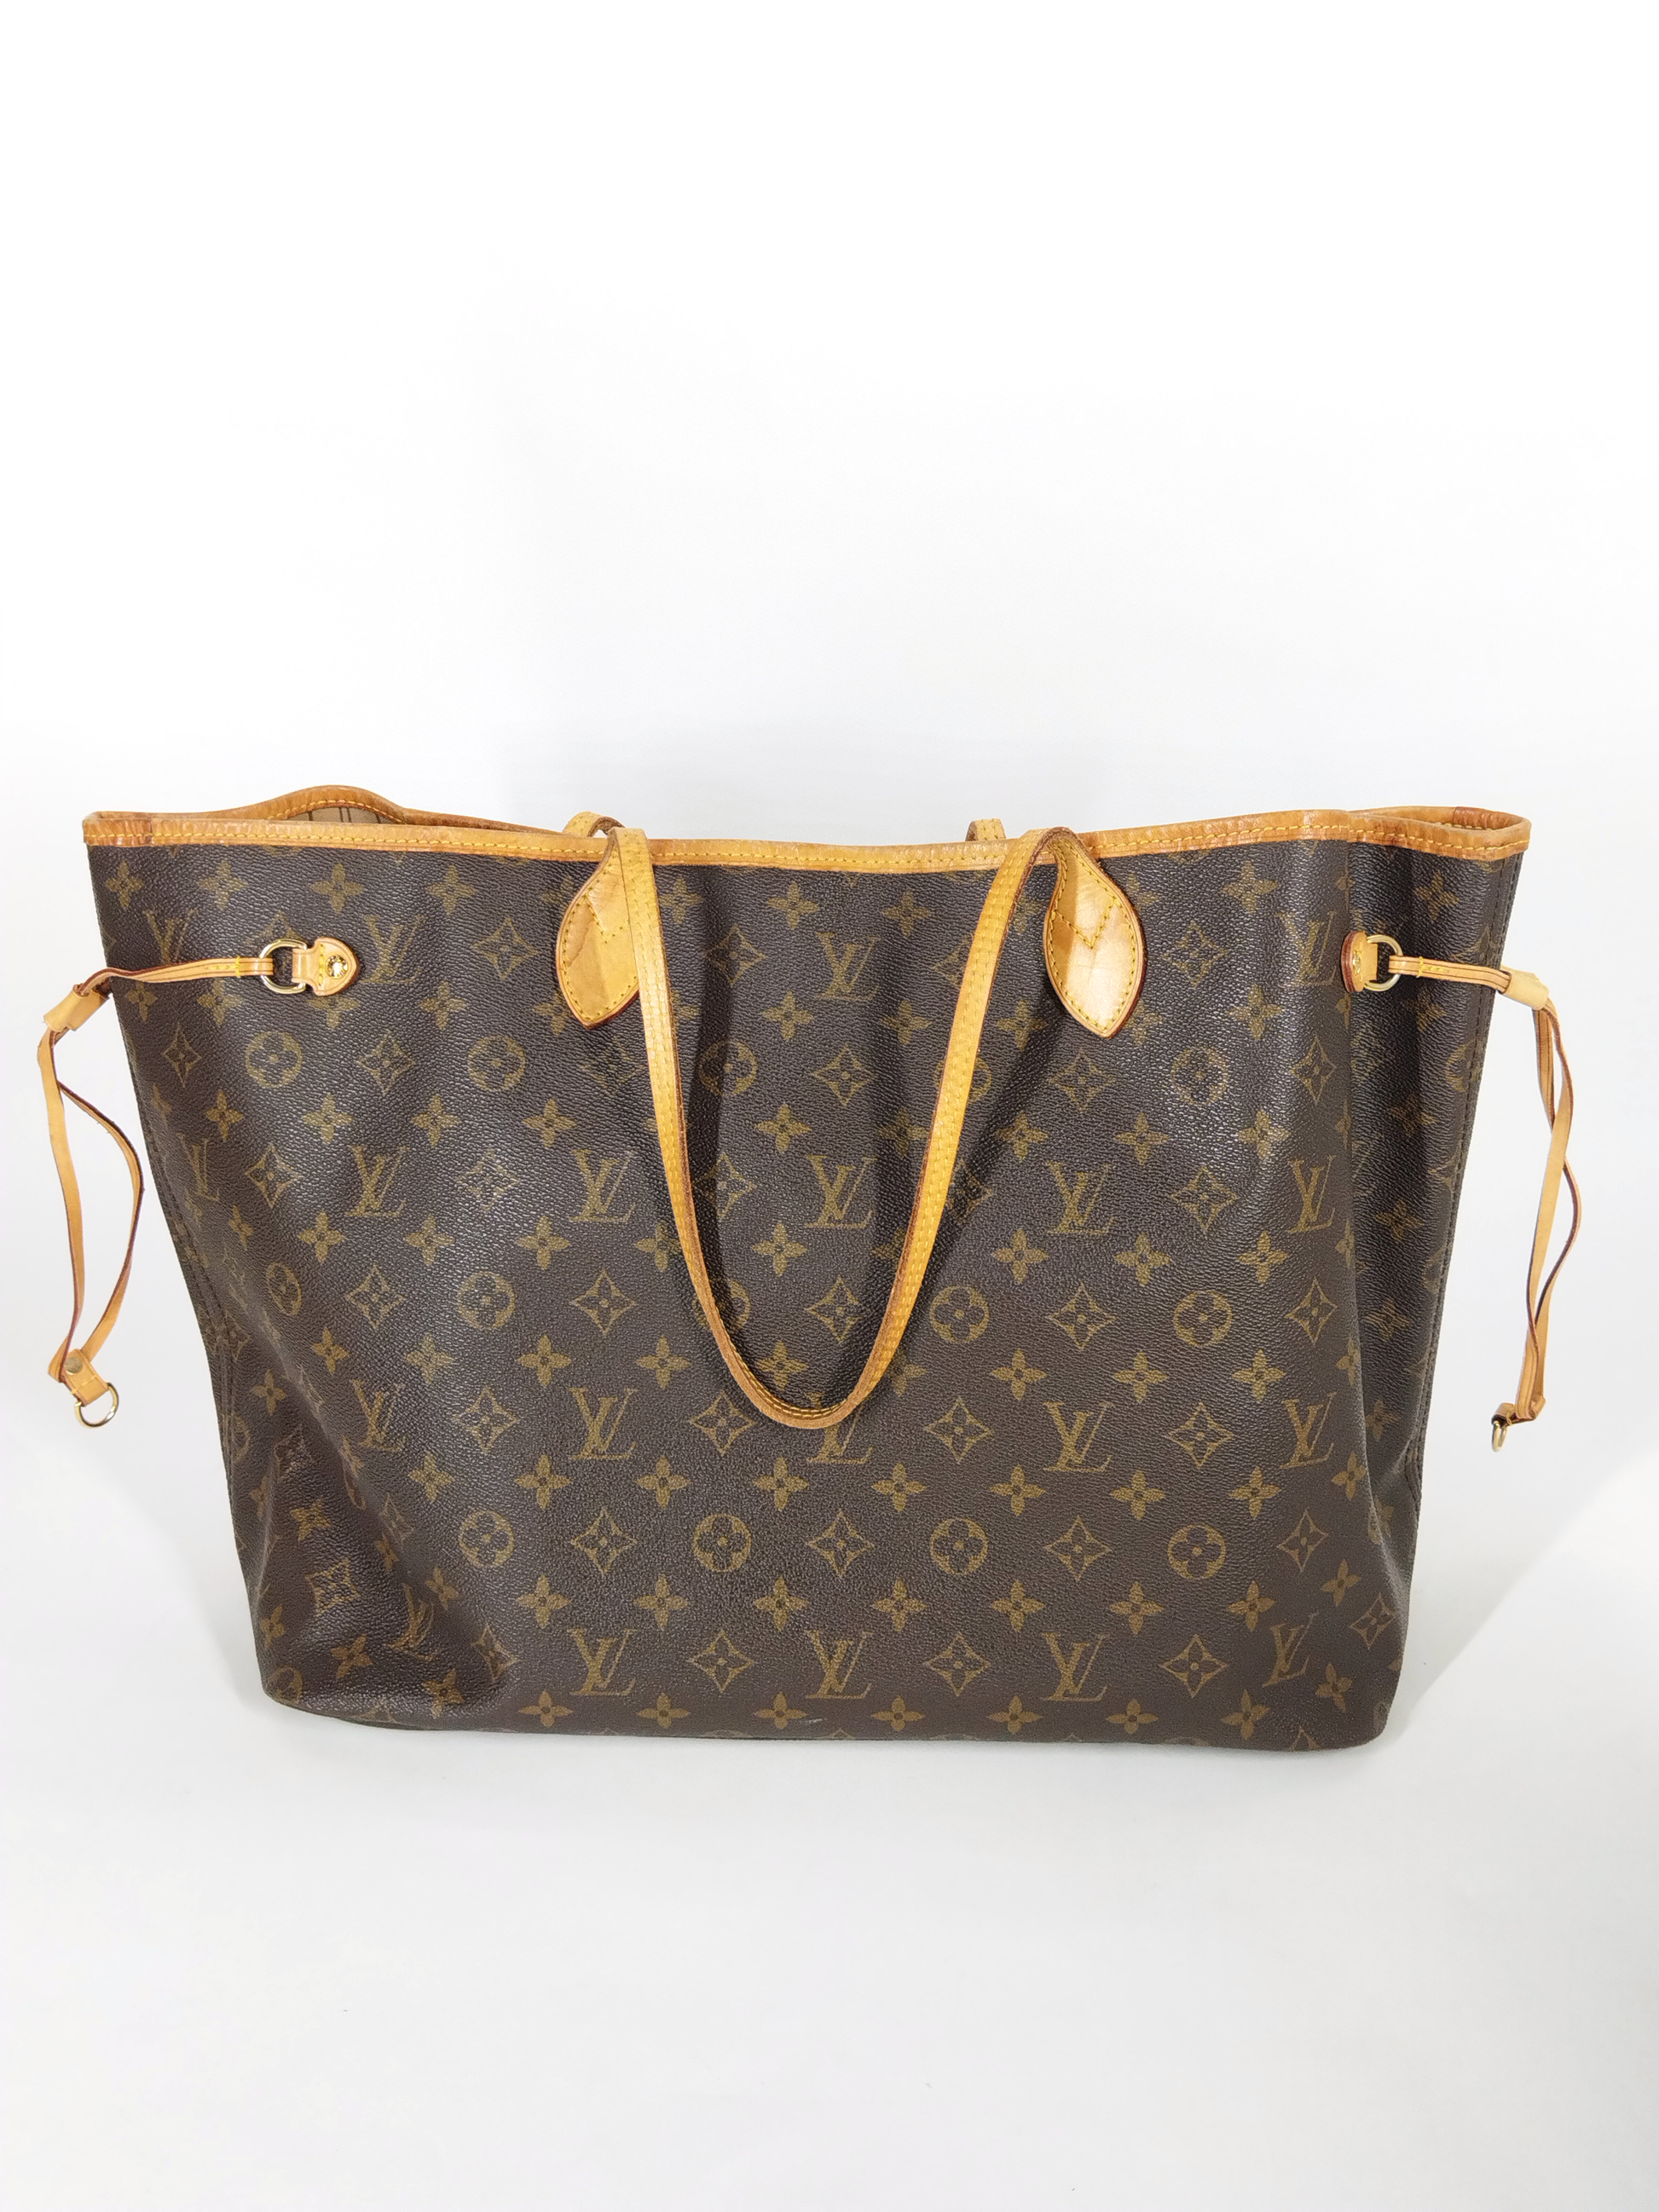 LOUIS VUITTON, BROWN AND WHITE LIMITED EDITION KUSAMA MONOGRAM CANVAS  NEVERFULL MM WITH GOLDEN BRASS HARDWARE, Luxury Handbags, 2020